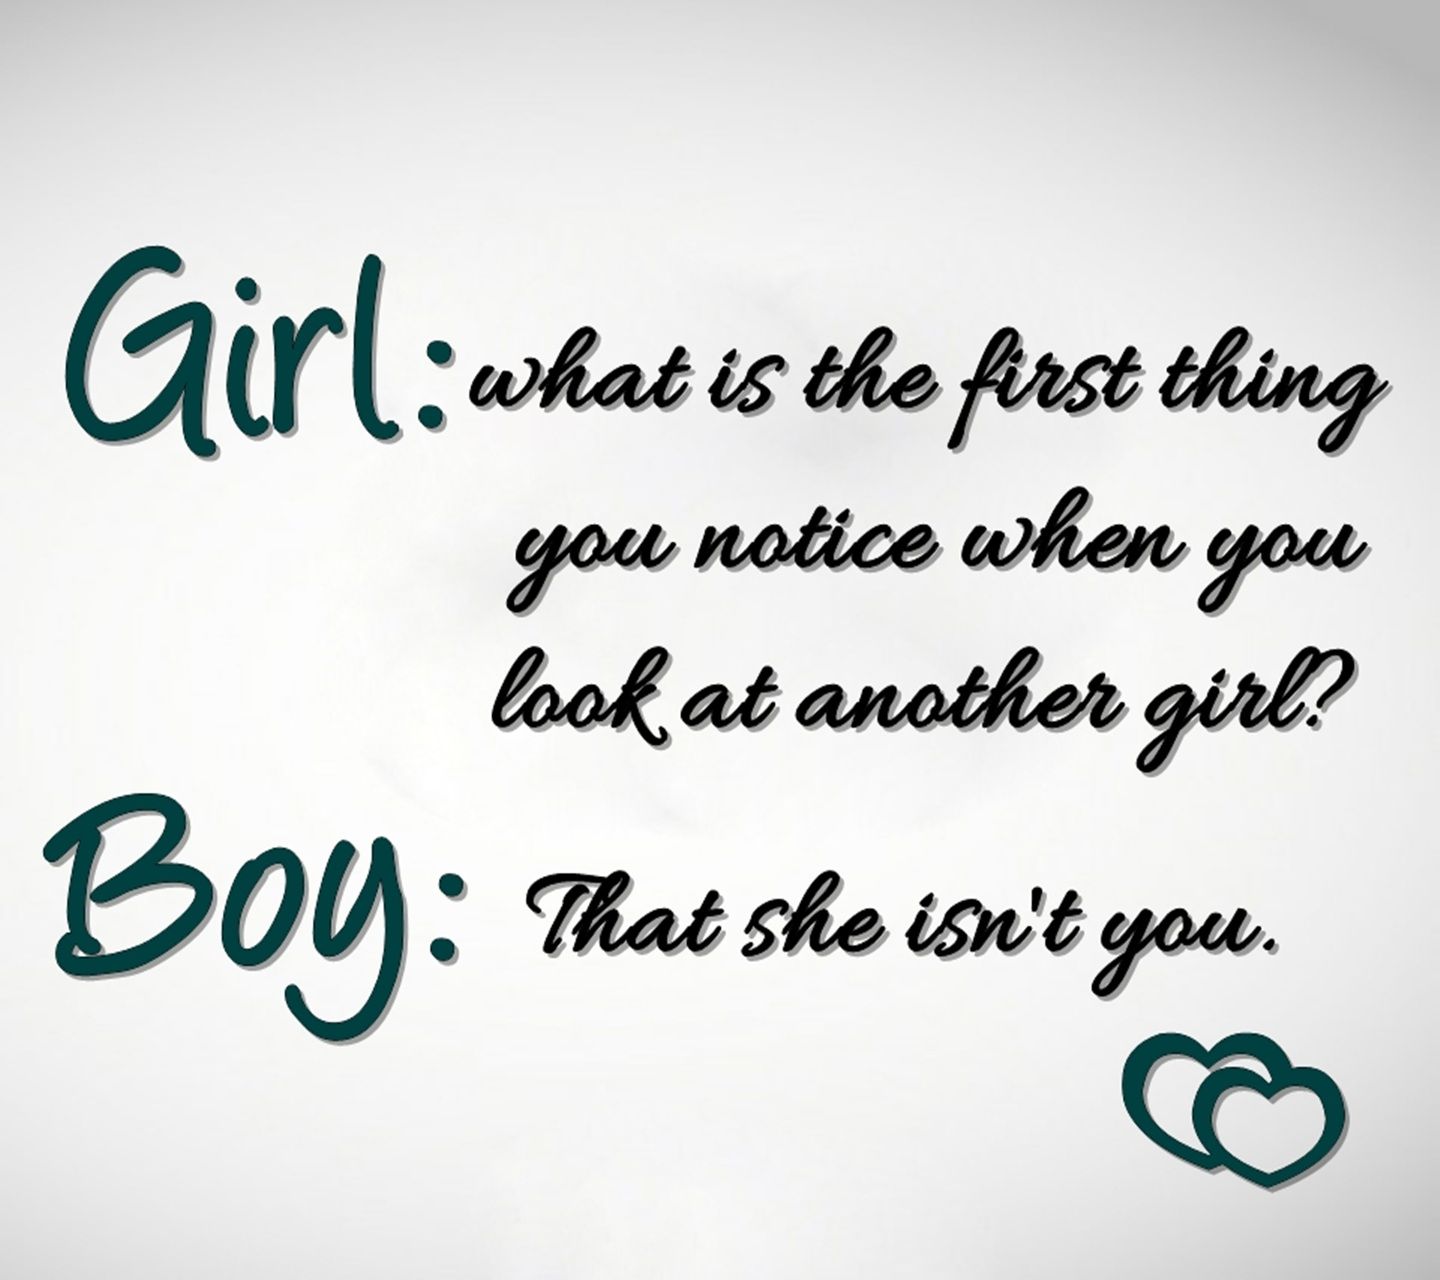 Cute Love Wallpaper For Mobile Phones Of Quotes On